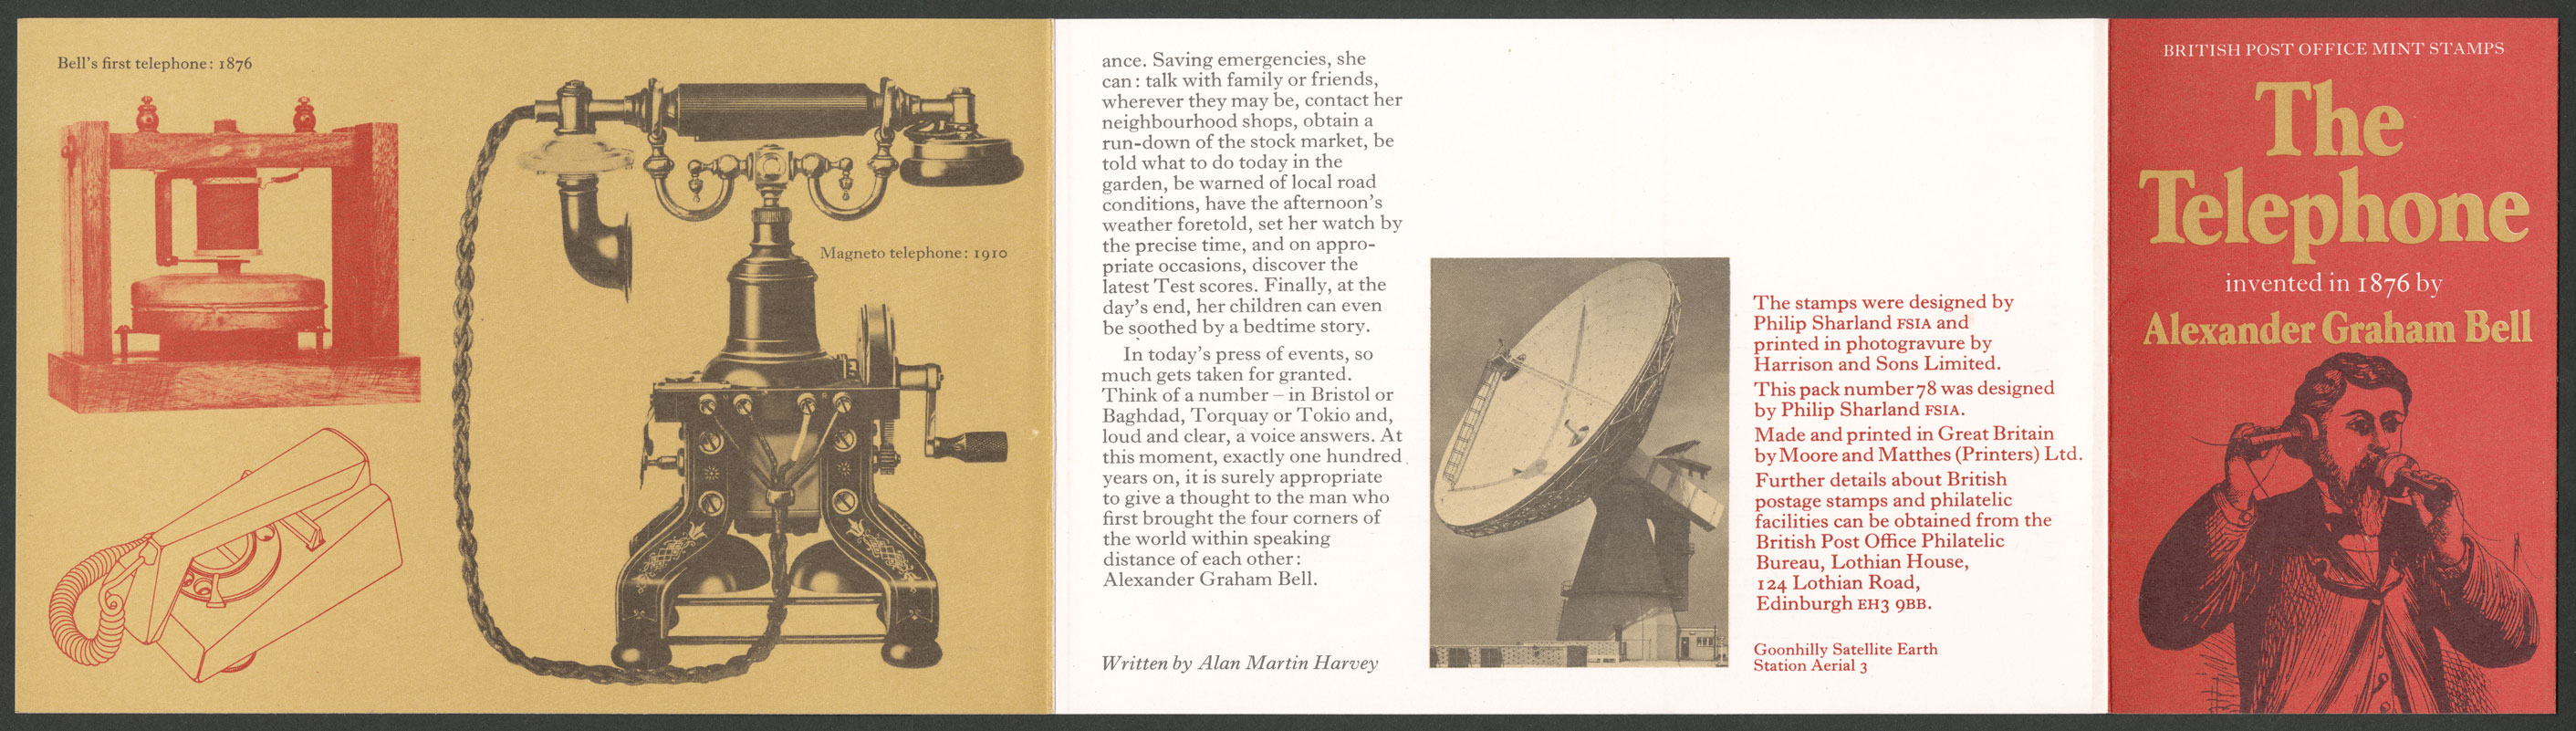 The internal information featuring images of telephones through the ages and an illustration of Alexander Graham Bell.